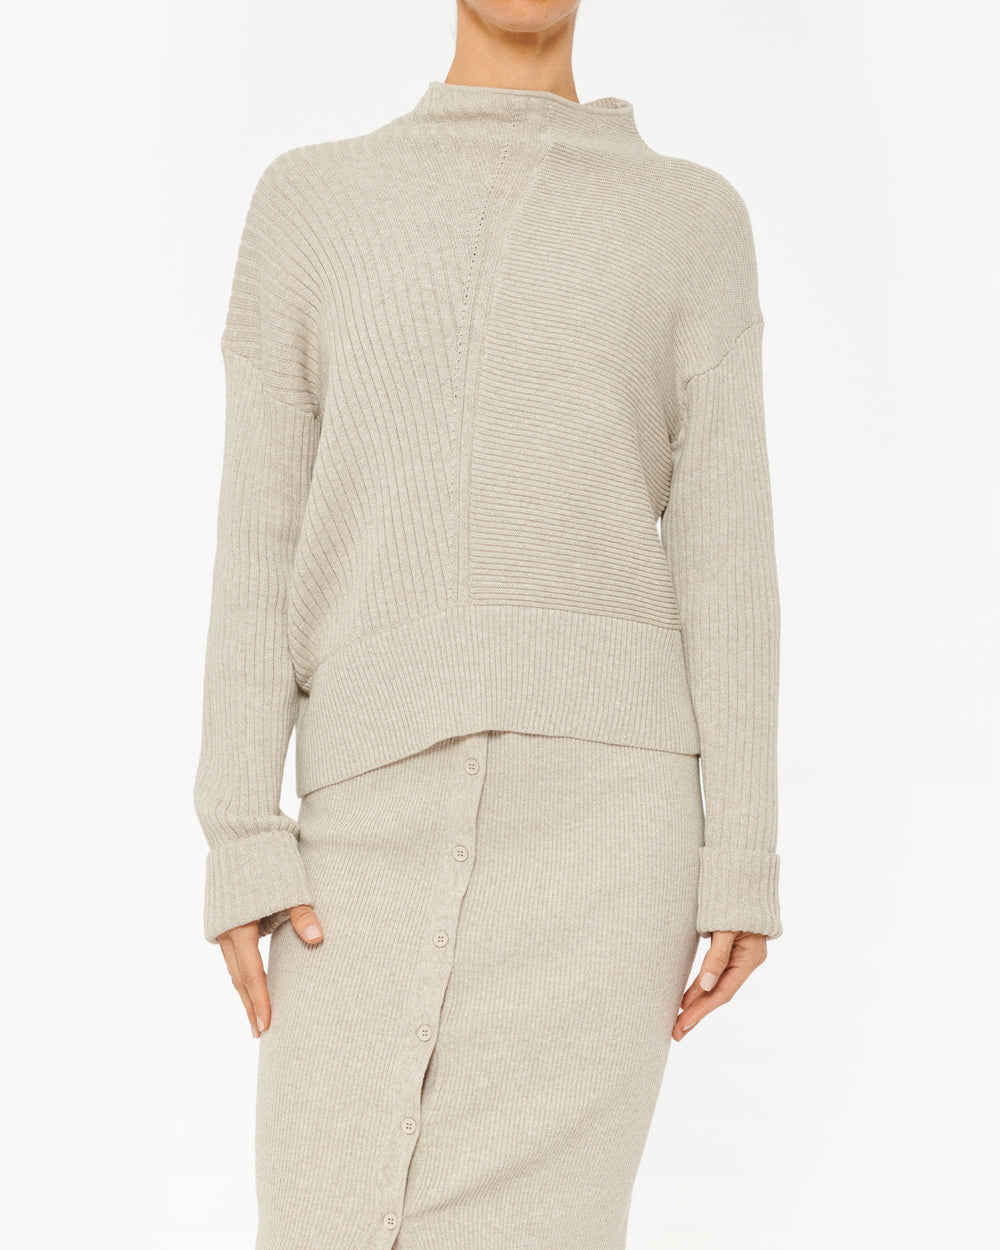 MONROW MOCK NECK SWEATER WITH RIB DETAIL